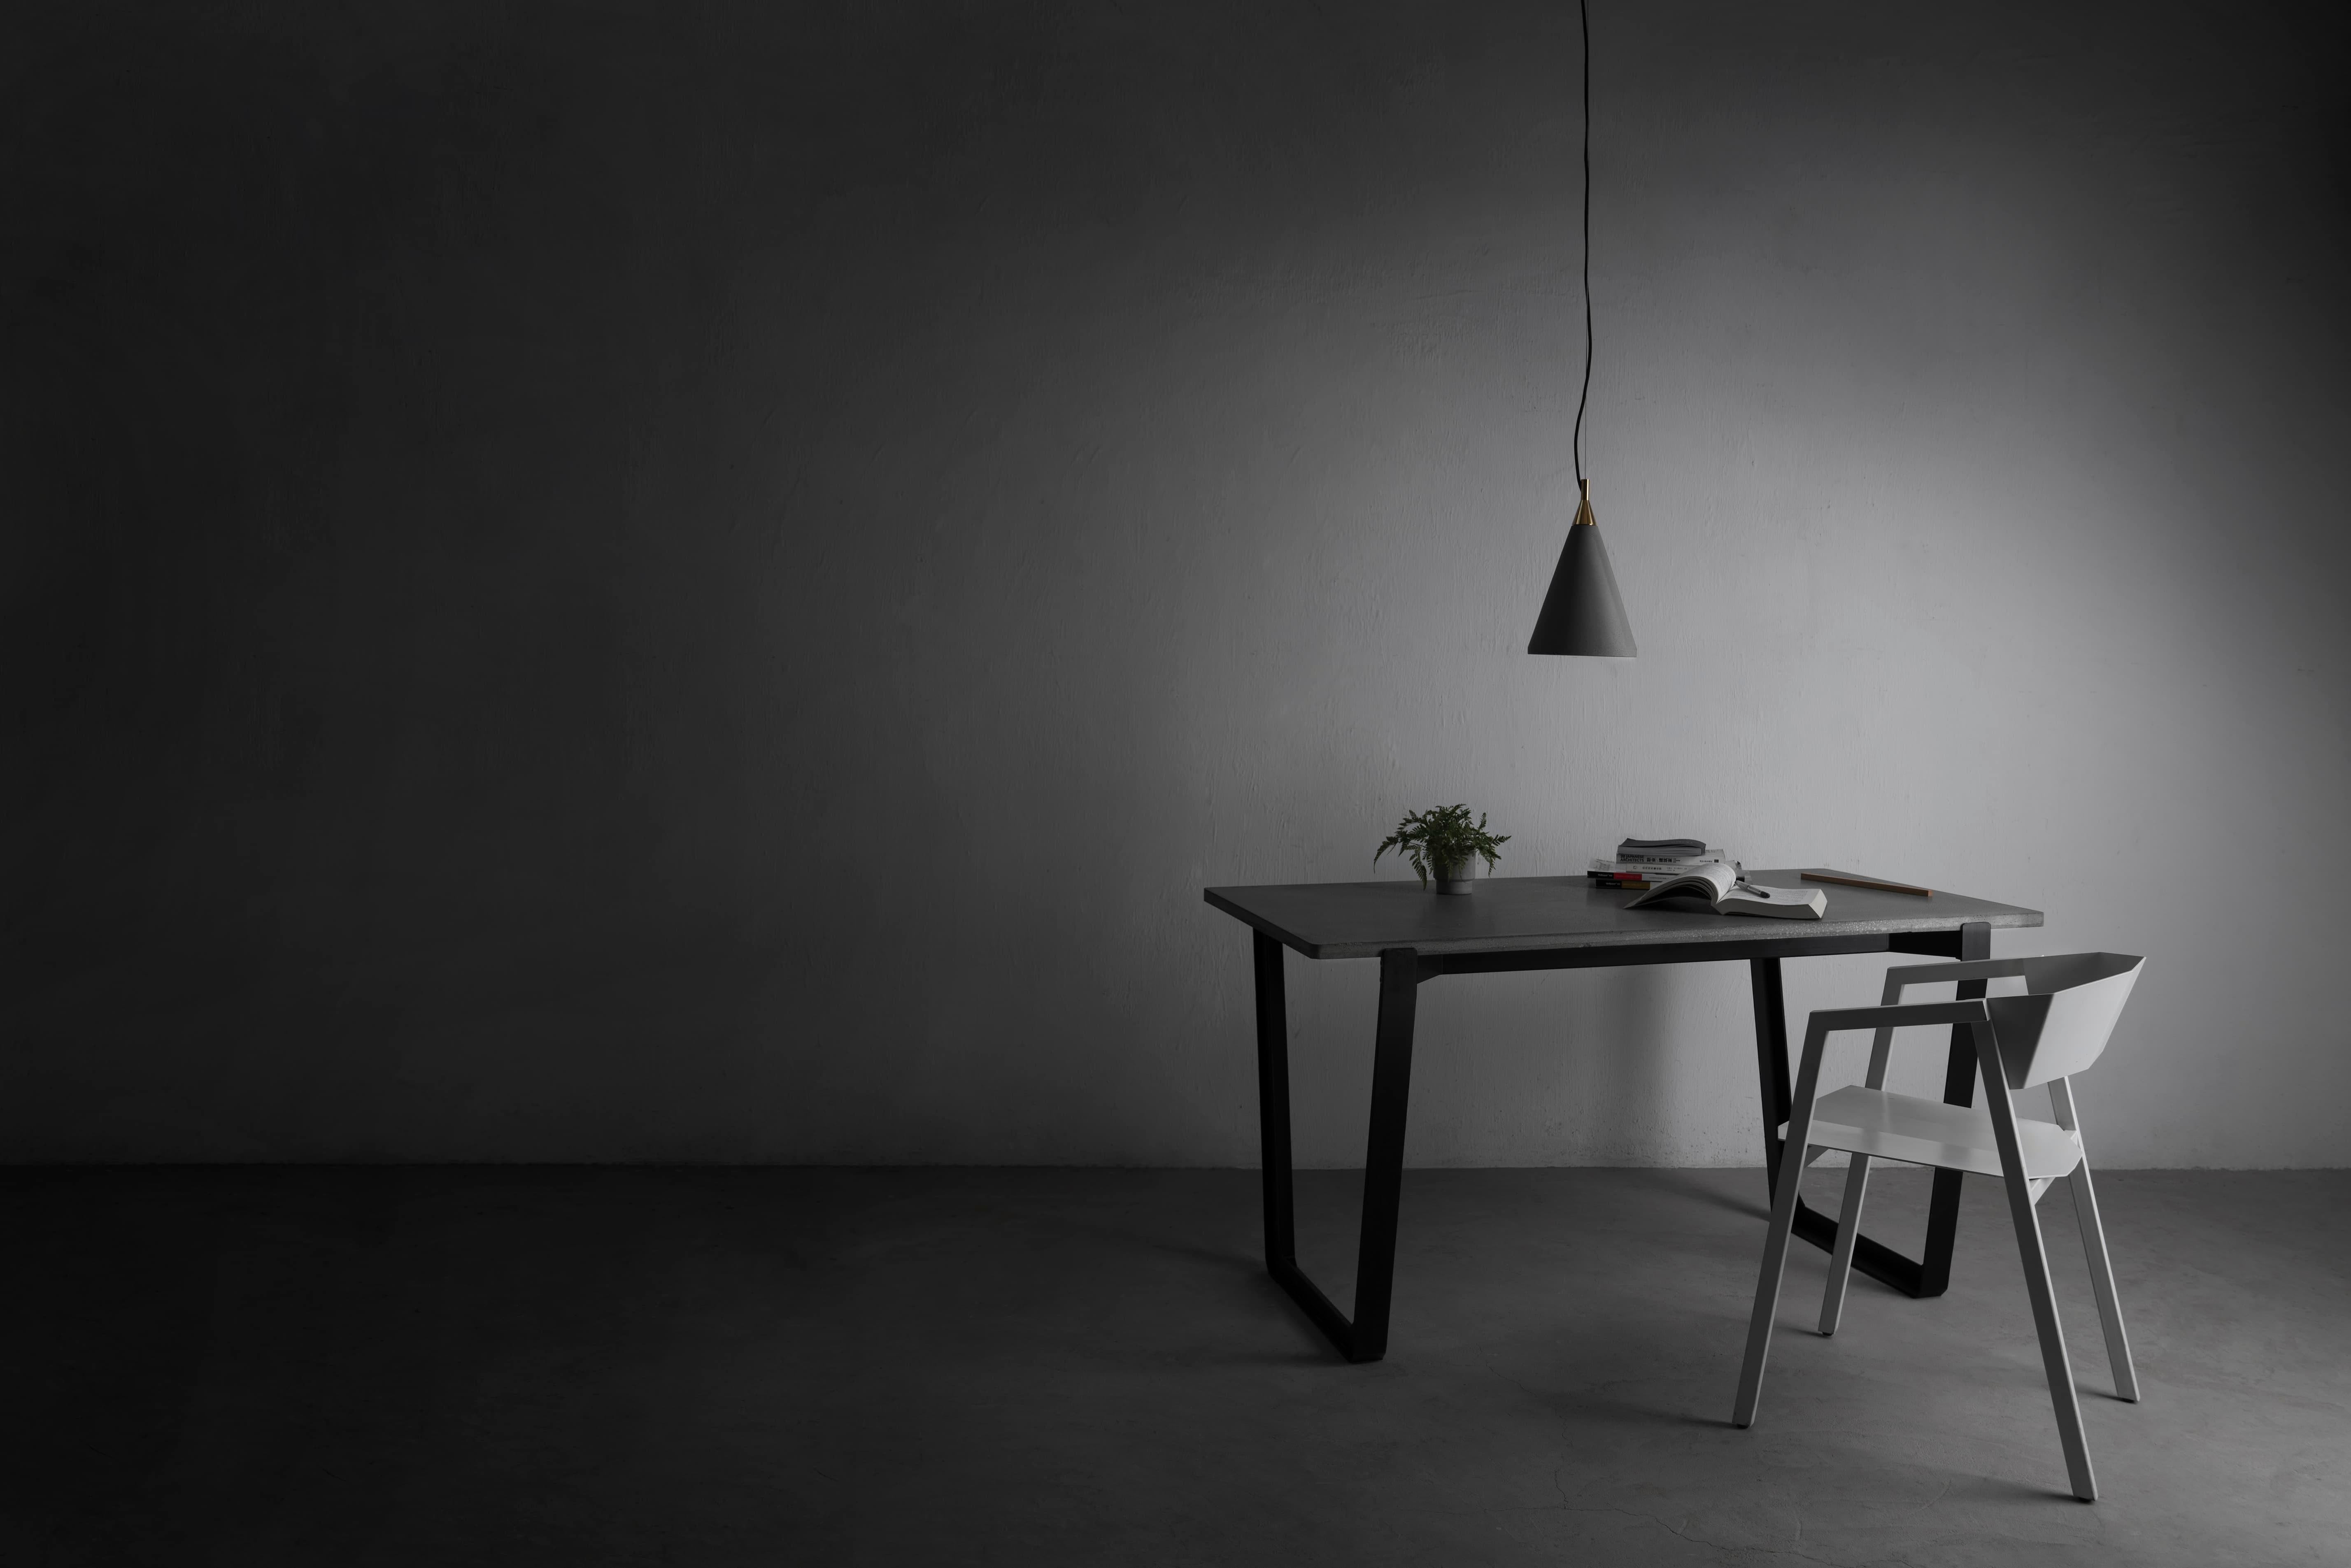 'NIAN' is a dining table
by Bentu Design

Table top: concrete
Table base: powder coated steel

4 sizes available: 
- Small: 180 x 80 cm (H 74cm)
- Medium: 200 x 80 cm (H 74cm)
- Large: 250 x 100 cm (H 74cm)
- Extra Large: 300 x 100 cm (H